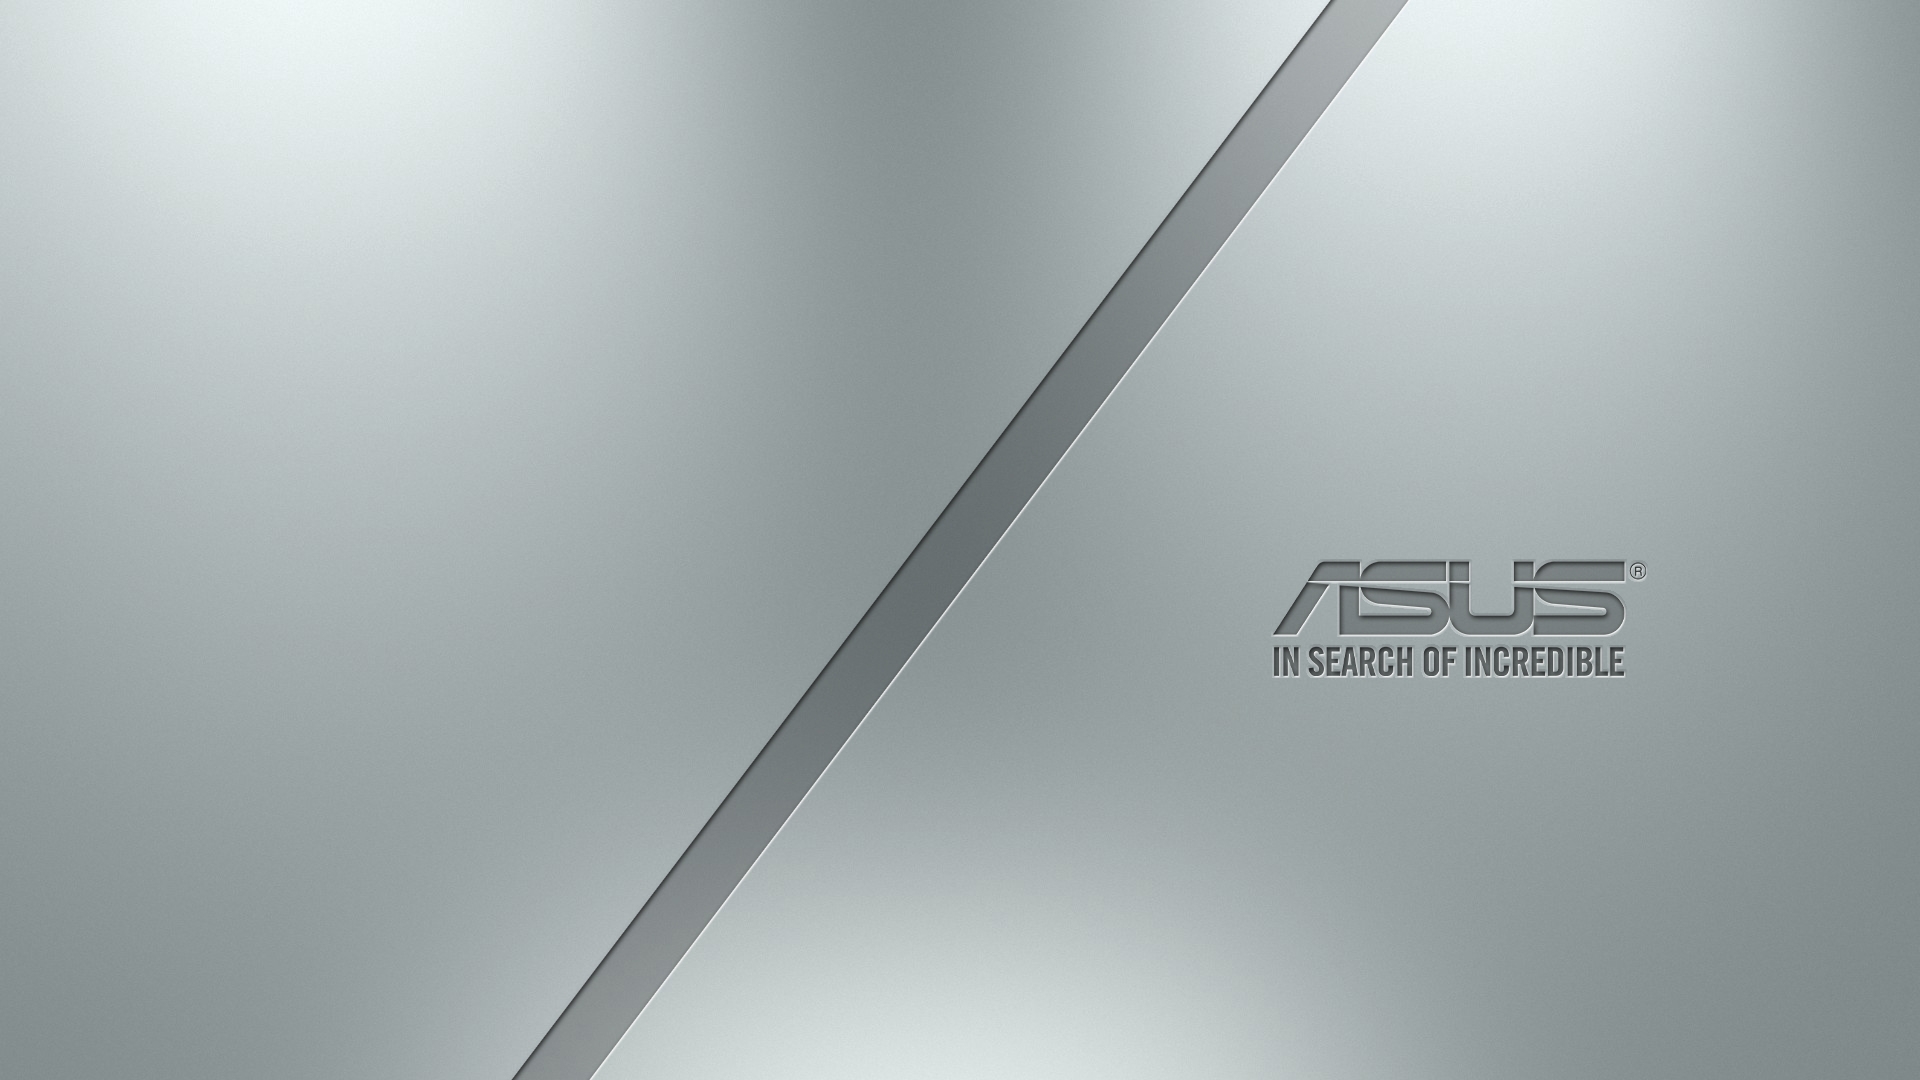 Asus In Search Of Incredible Wallpaper Hd , HD Wallpaper & Backgrounds